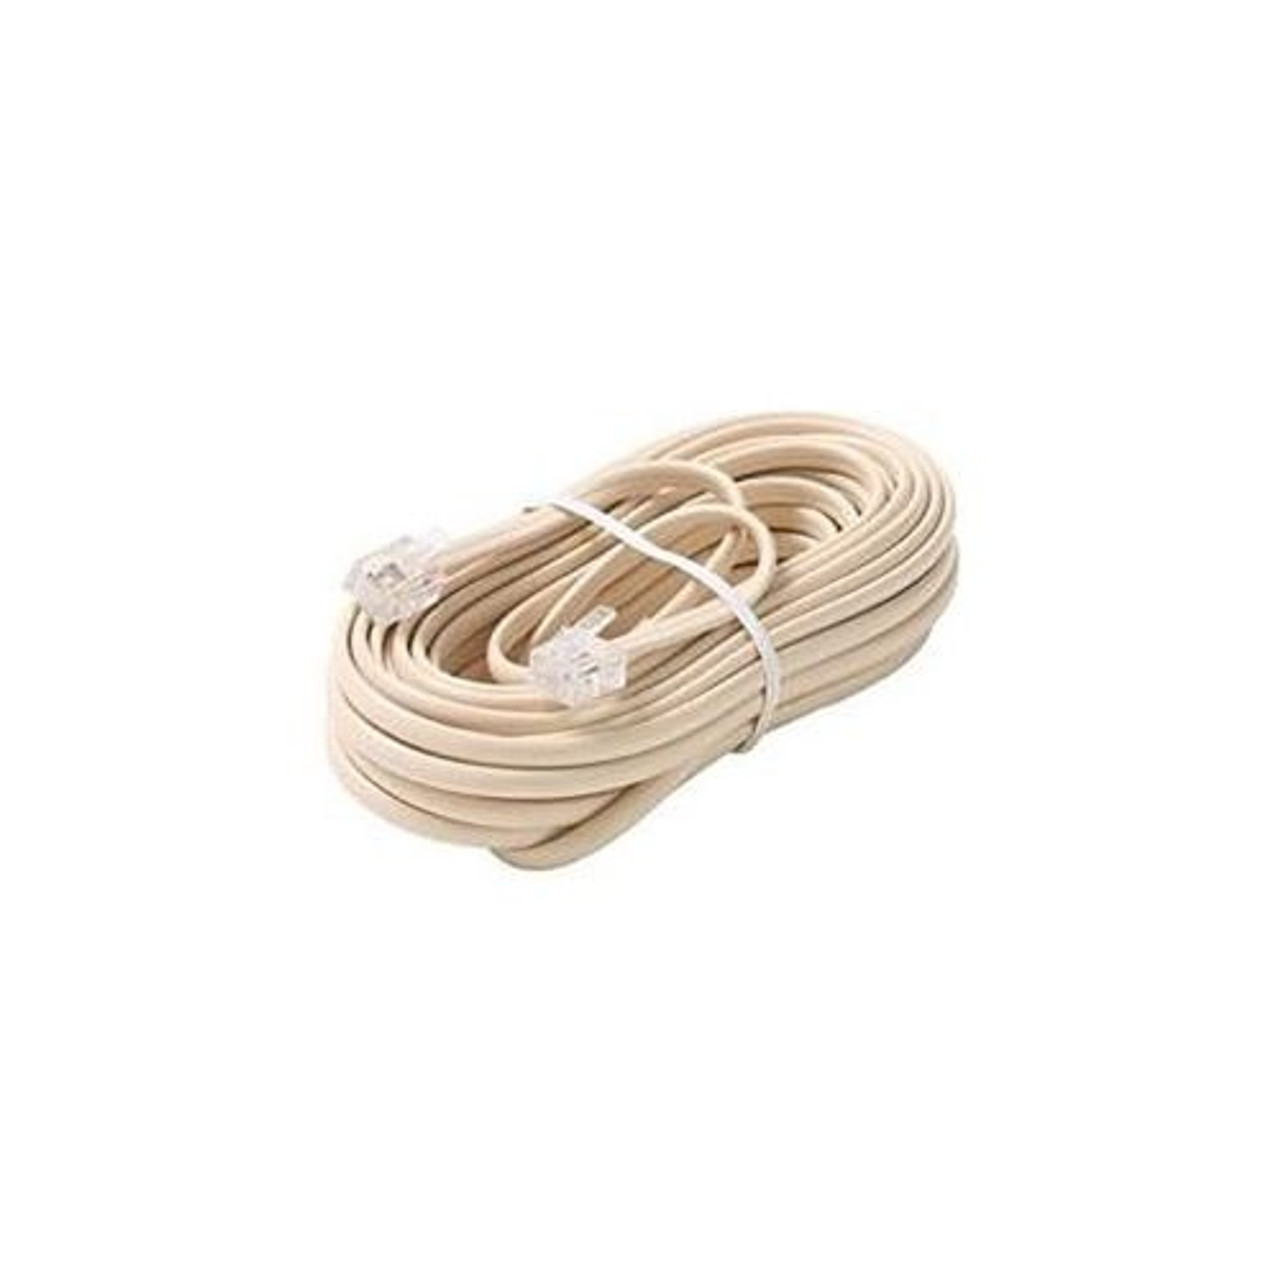 Eagle 25 FT Phone RJ11 Cord Ivory 4 Conductor Modular Plug Flat Telephone Line Modular RJ11 Phone Connect Ivory RJ-11 Communication Wire Extension Cable with Snap-In Wall